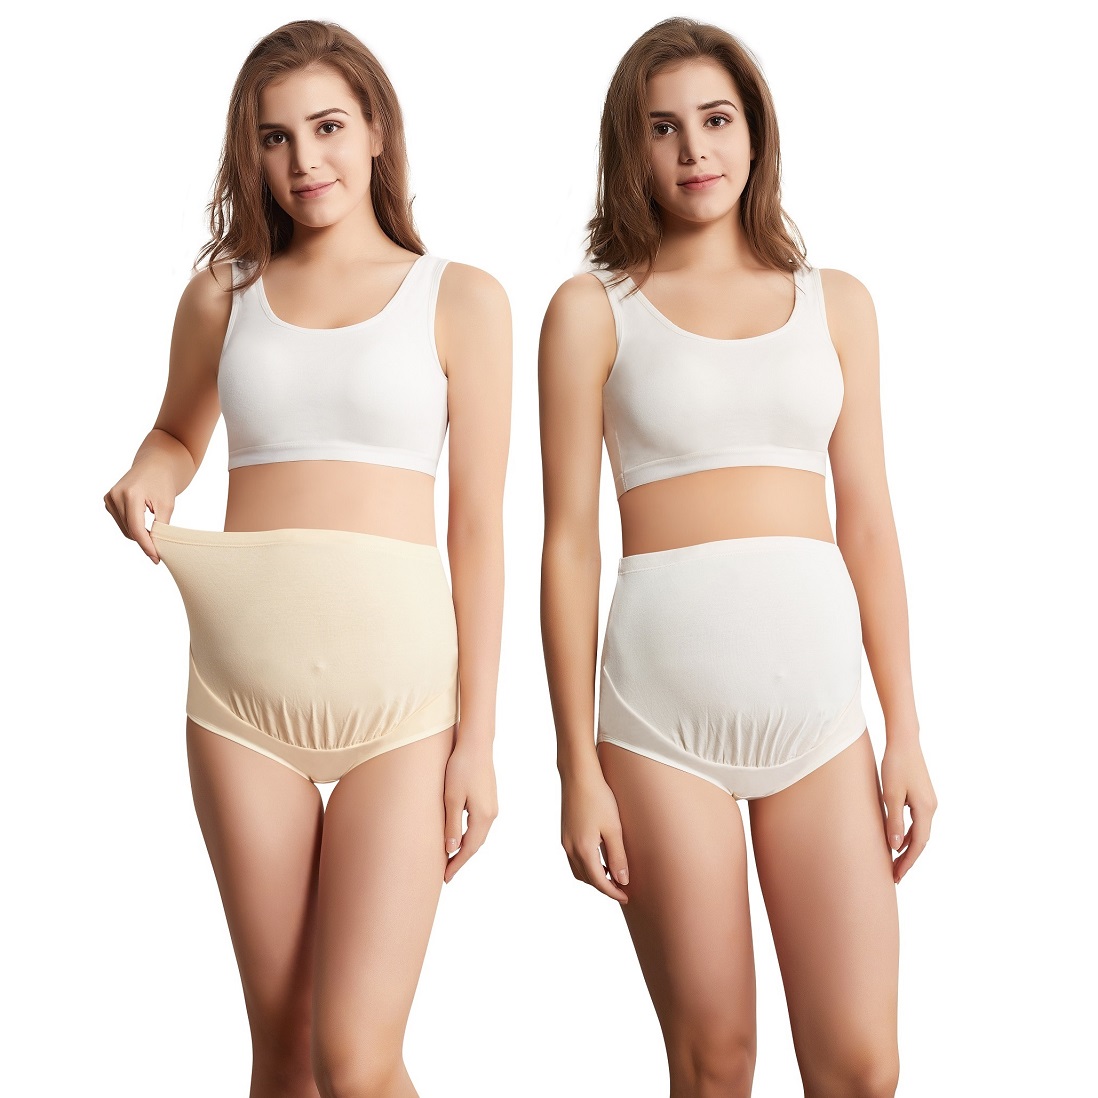 BMAMA Maternity Underwear Under the Bump Cotton Panties for Womens